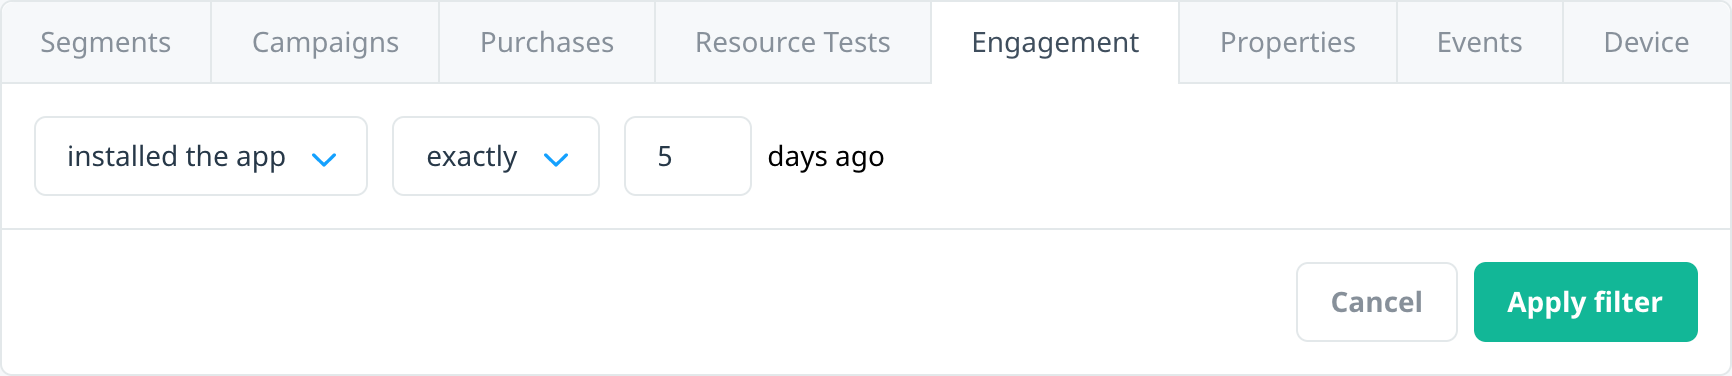 New configuration for daily recurring push campaigns that targets users who recently installed the ap